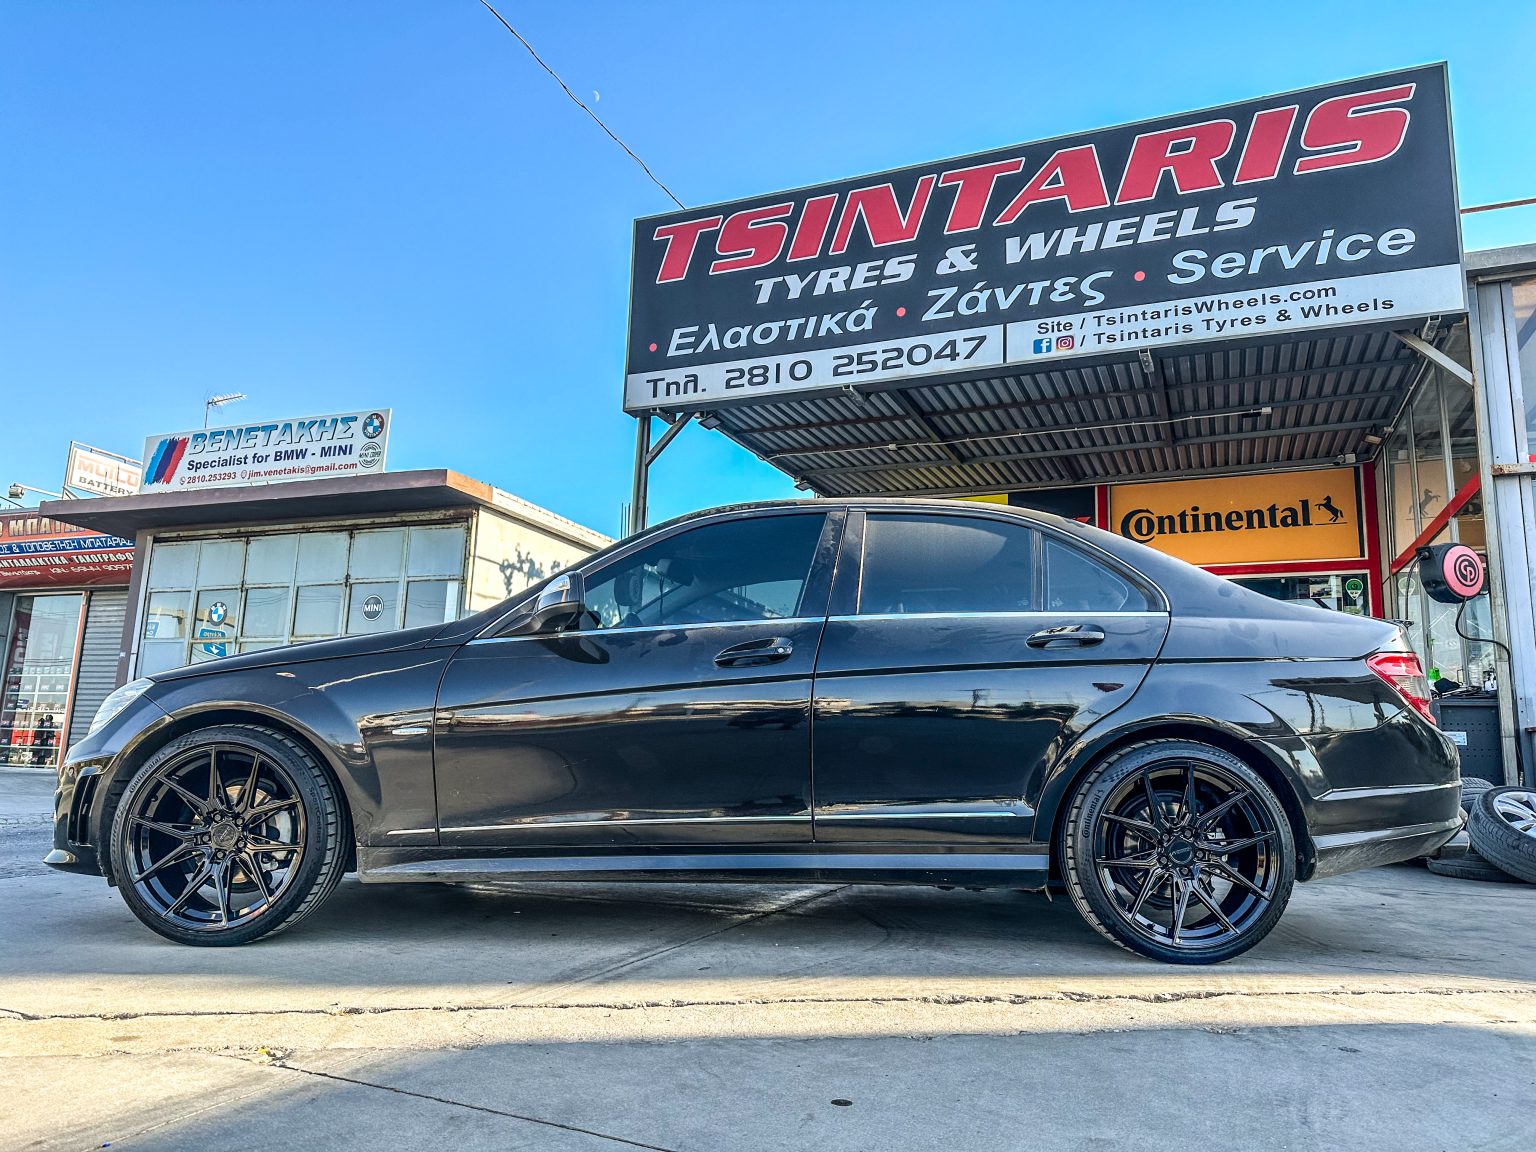 Total Black και όλα τα βλέπω μαύρα🤩
Mercedes Benz W204 με νέες 19’ ζάντες Arceo Marseille σε απόχρωση glossy black & ελαστικά 235/35R19 XL 91Y Continental SportContact 7